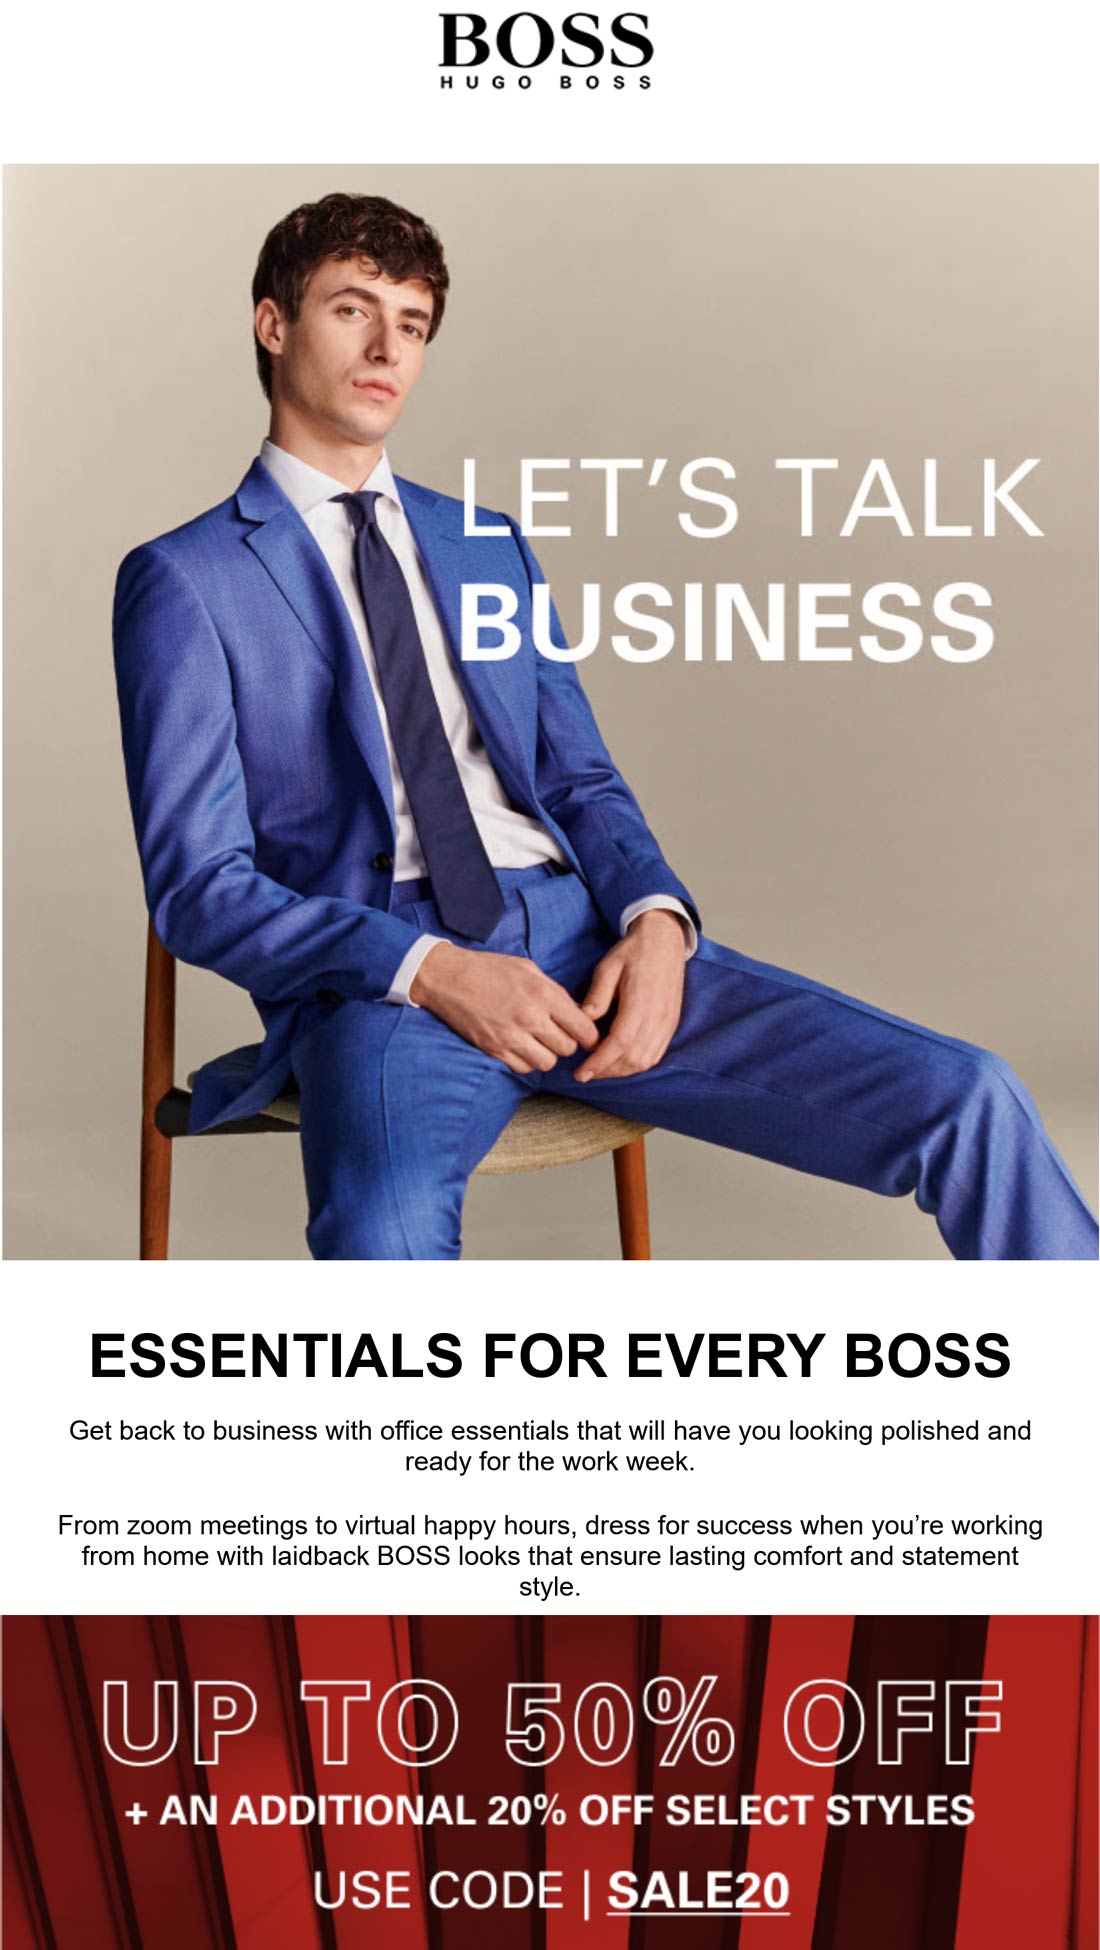 BOSS stores Coupon  Extra 20-50% off sale items at HUGO BOSS via promo code SALE20 #boss 